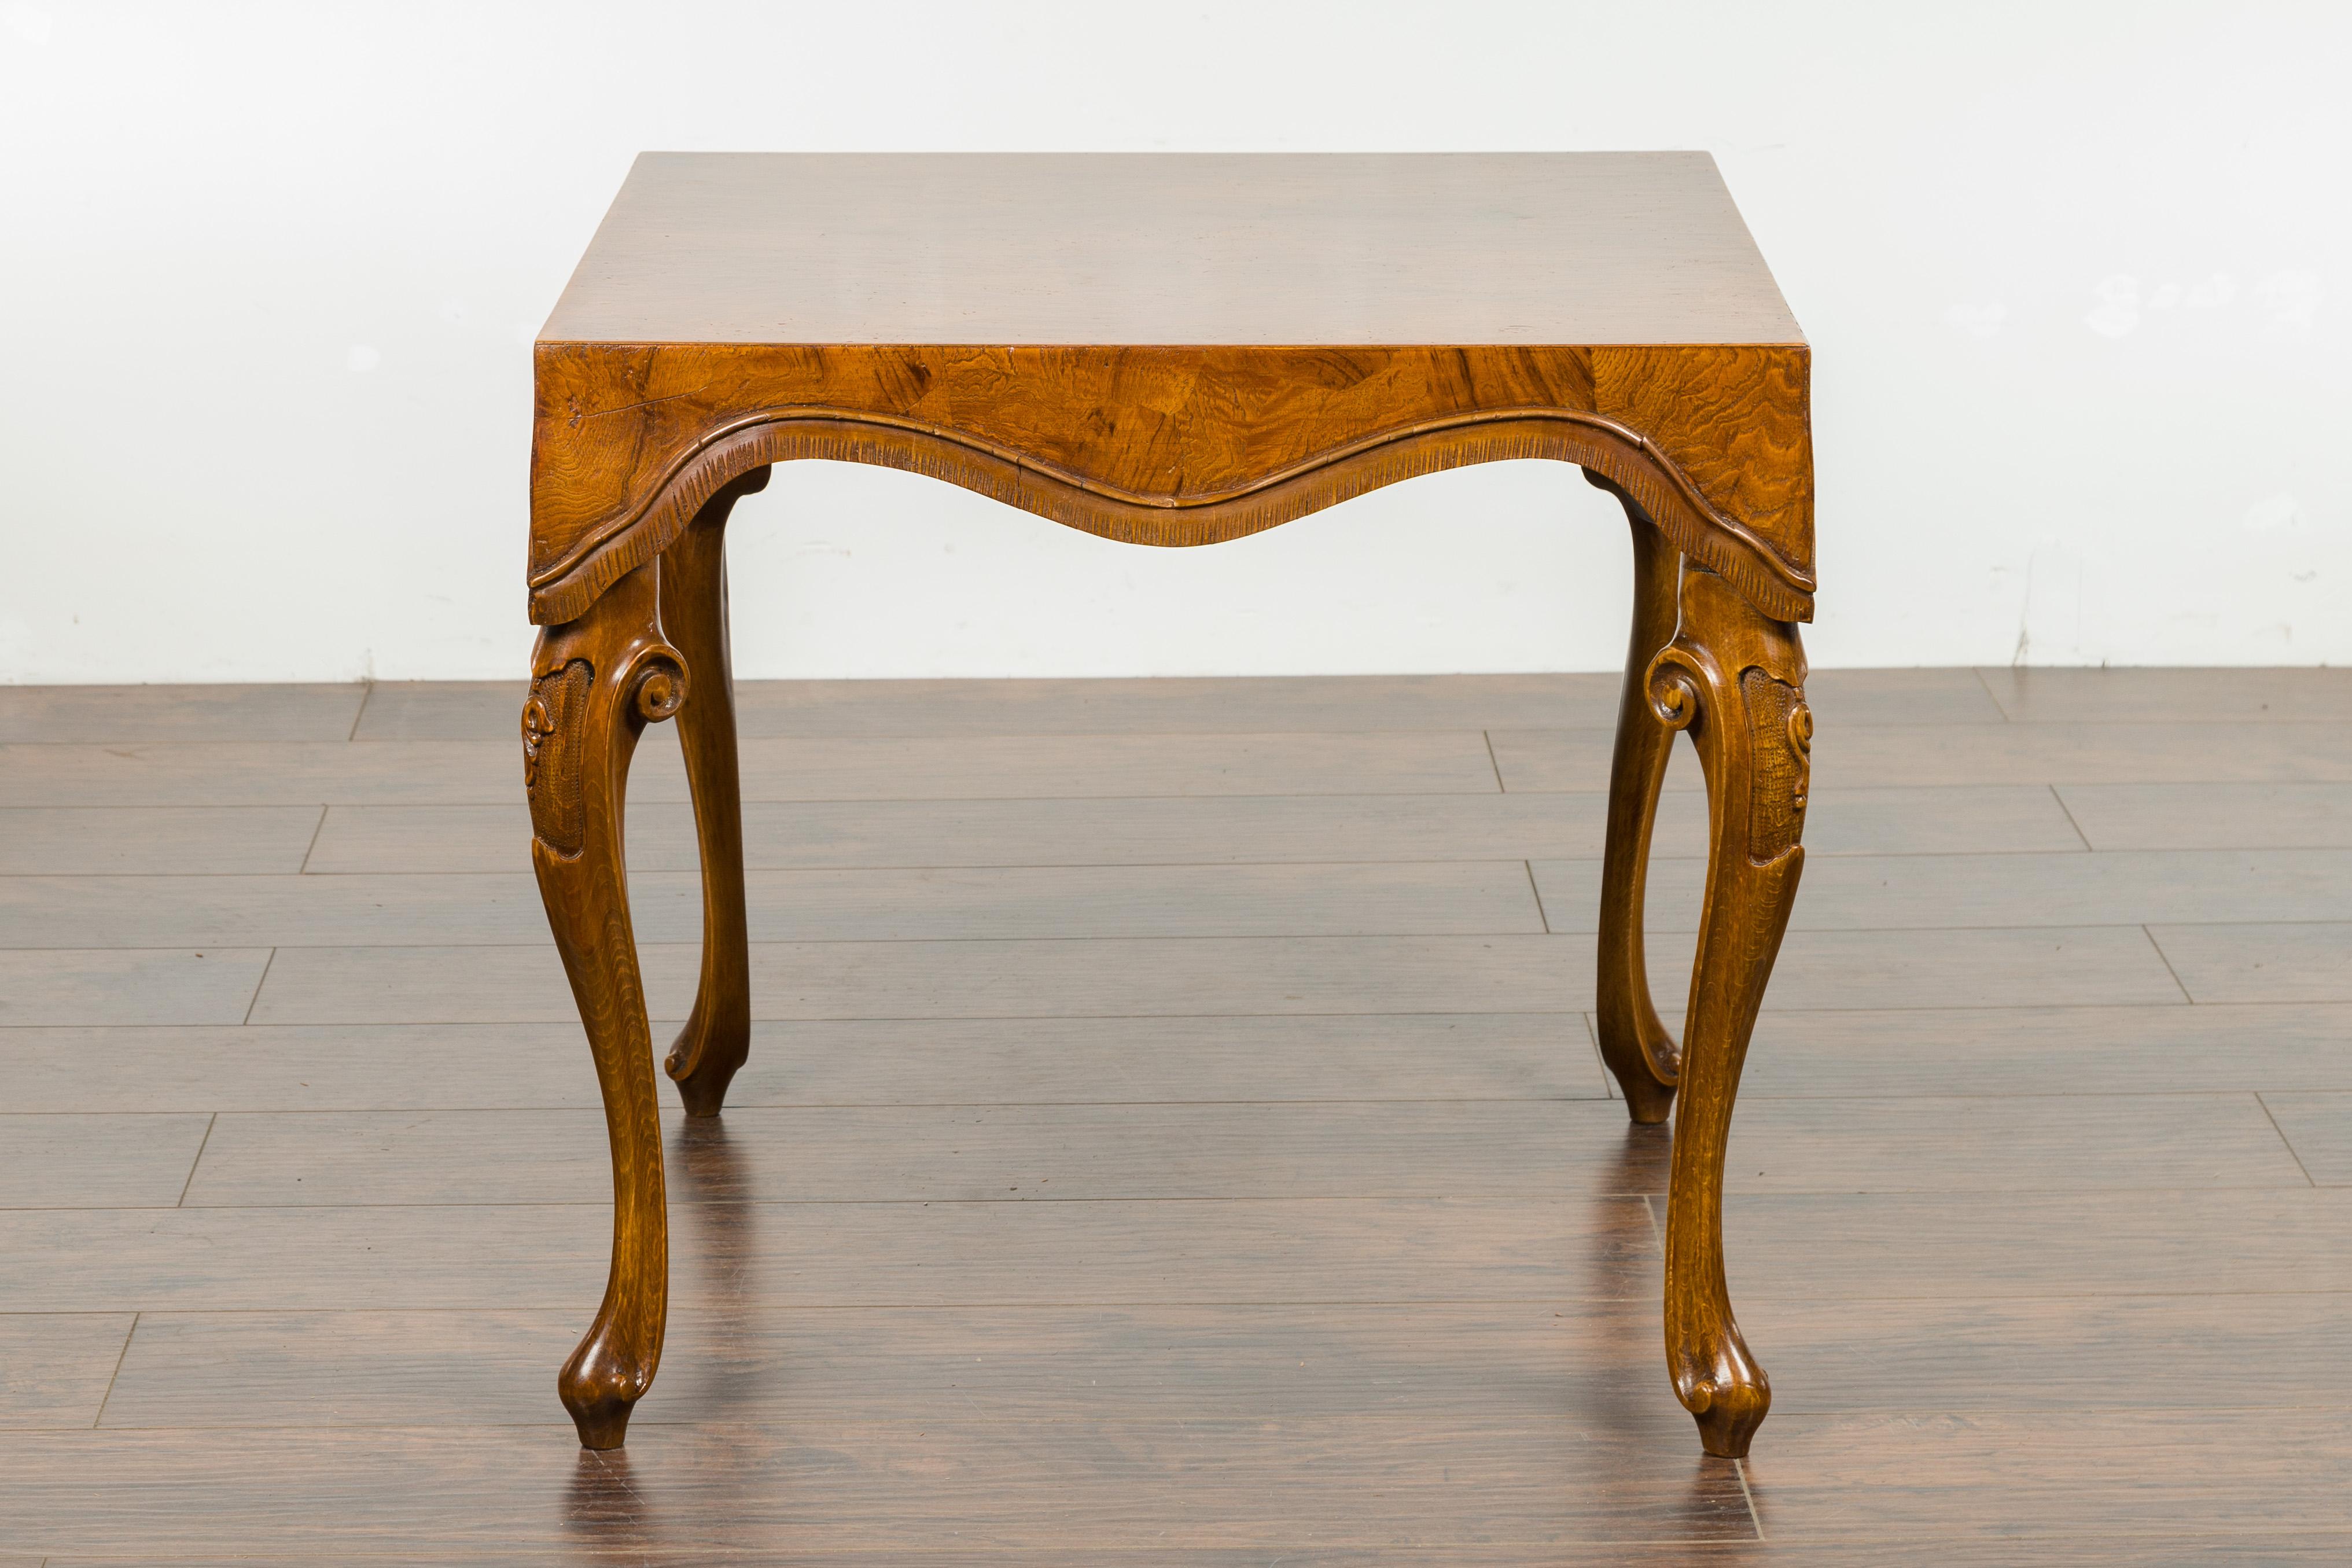 Italian Rococo Style Midcentury Walnut and Olive Wood Table with Cabriole Legs For Sale 4